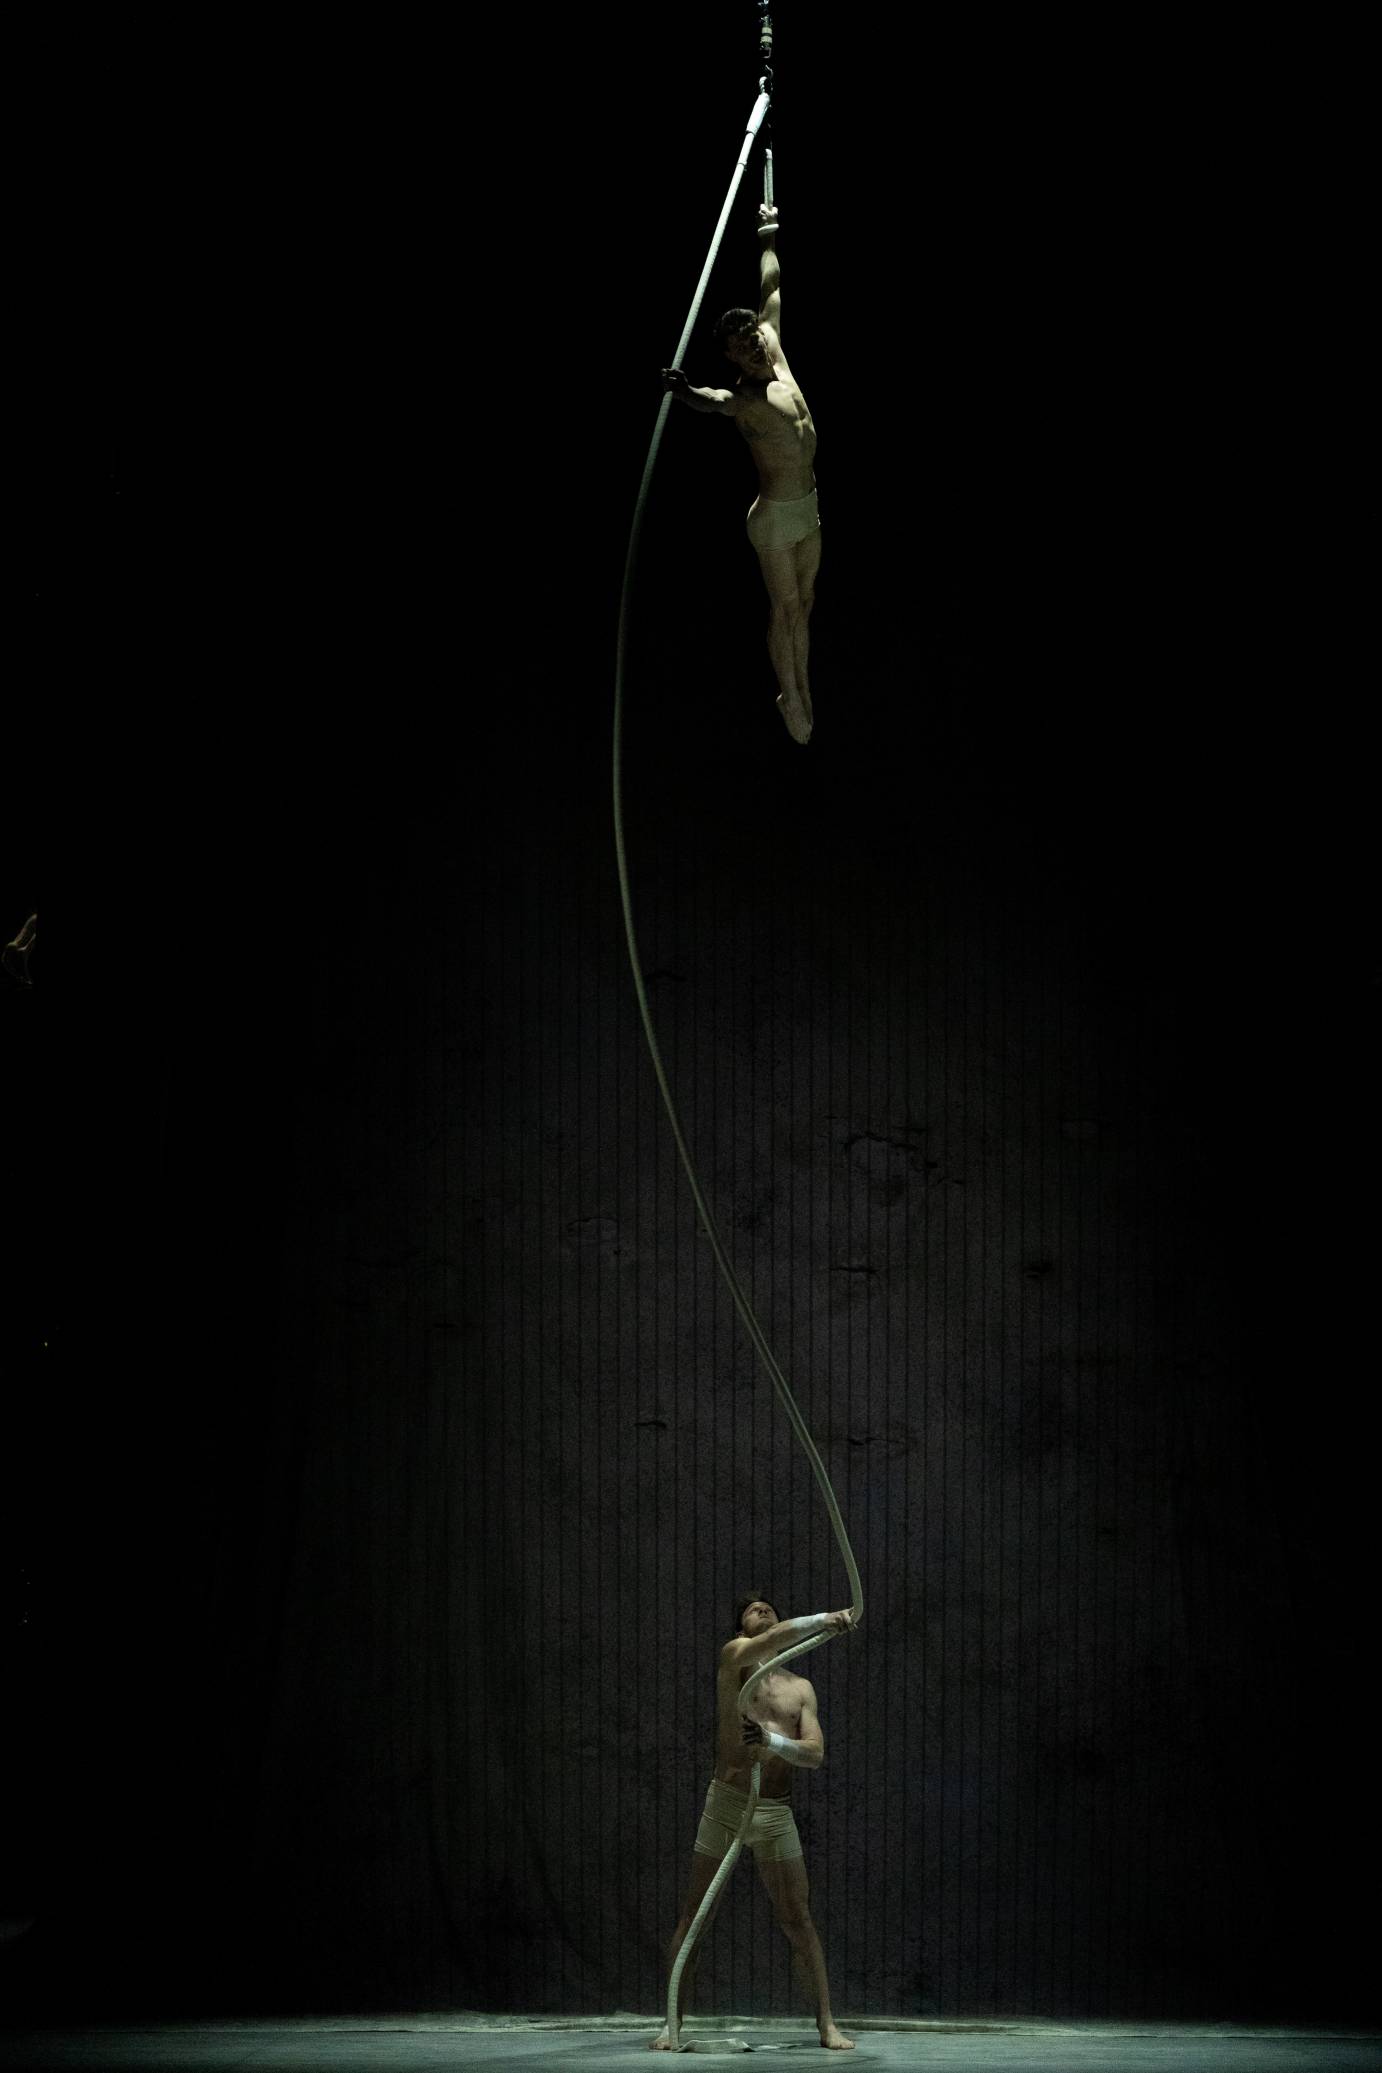 One man stands on a trapeze while another stands below him